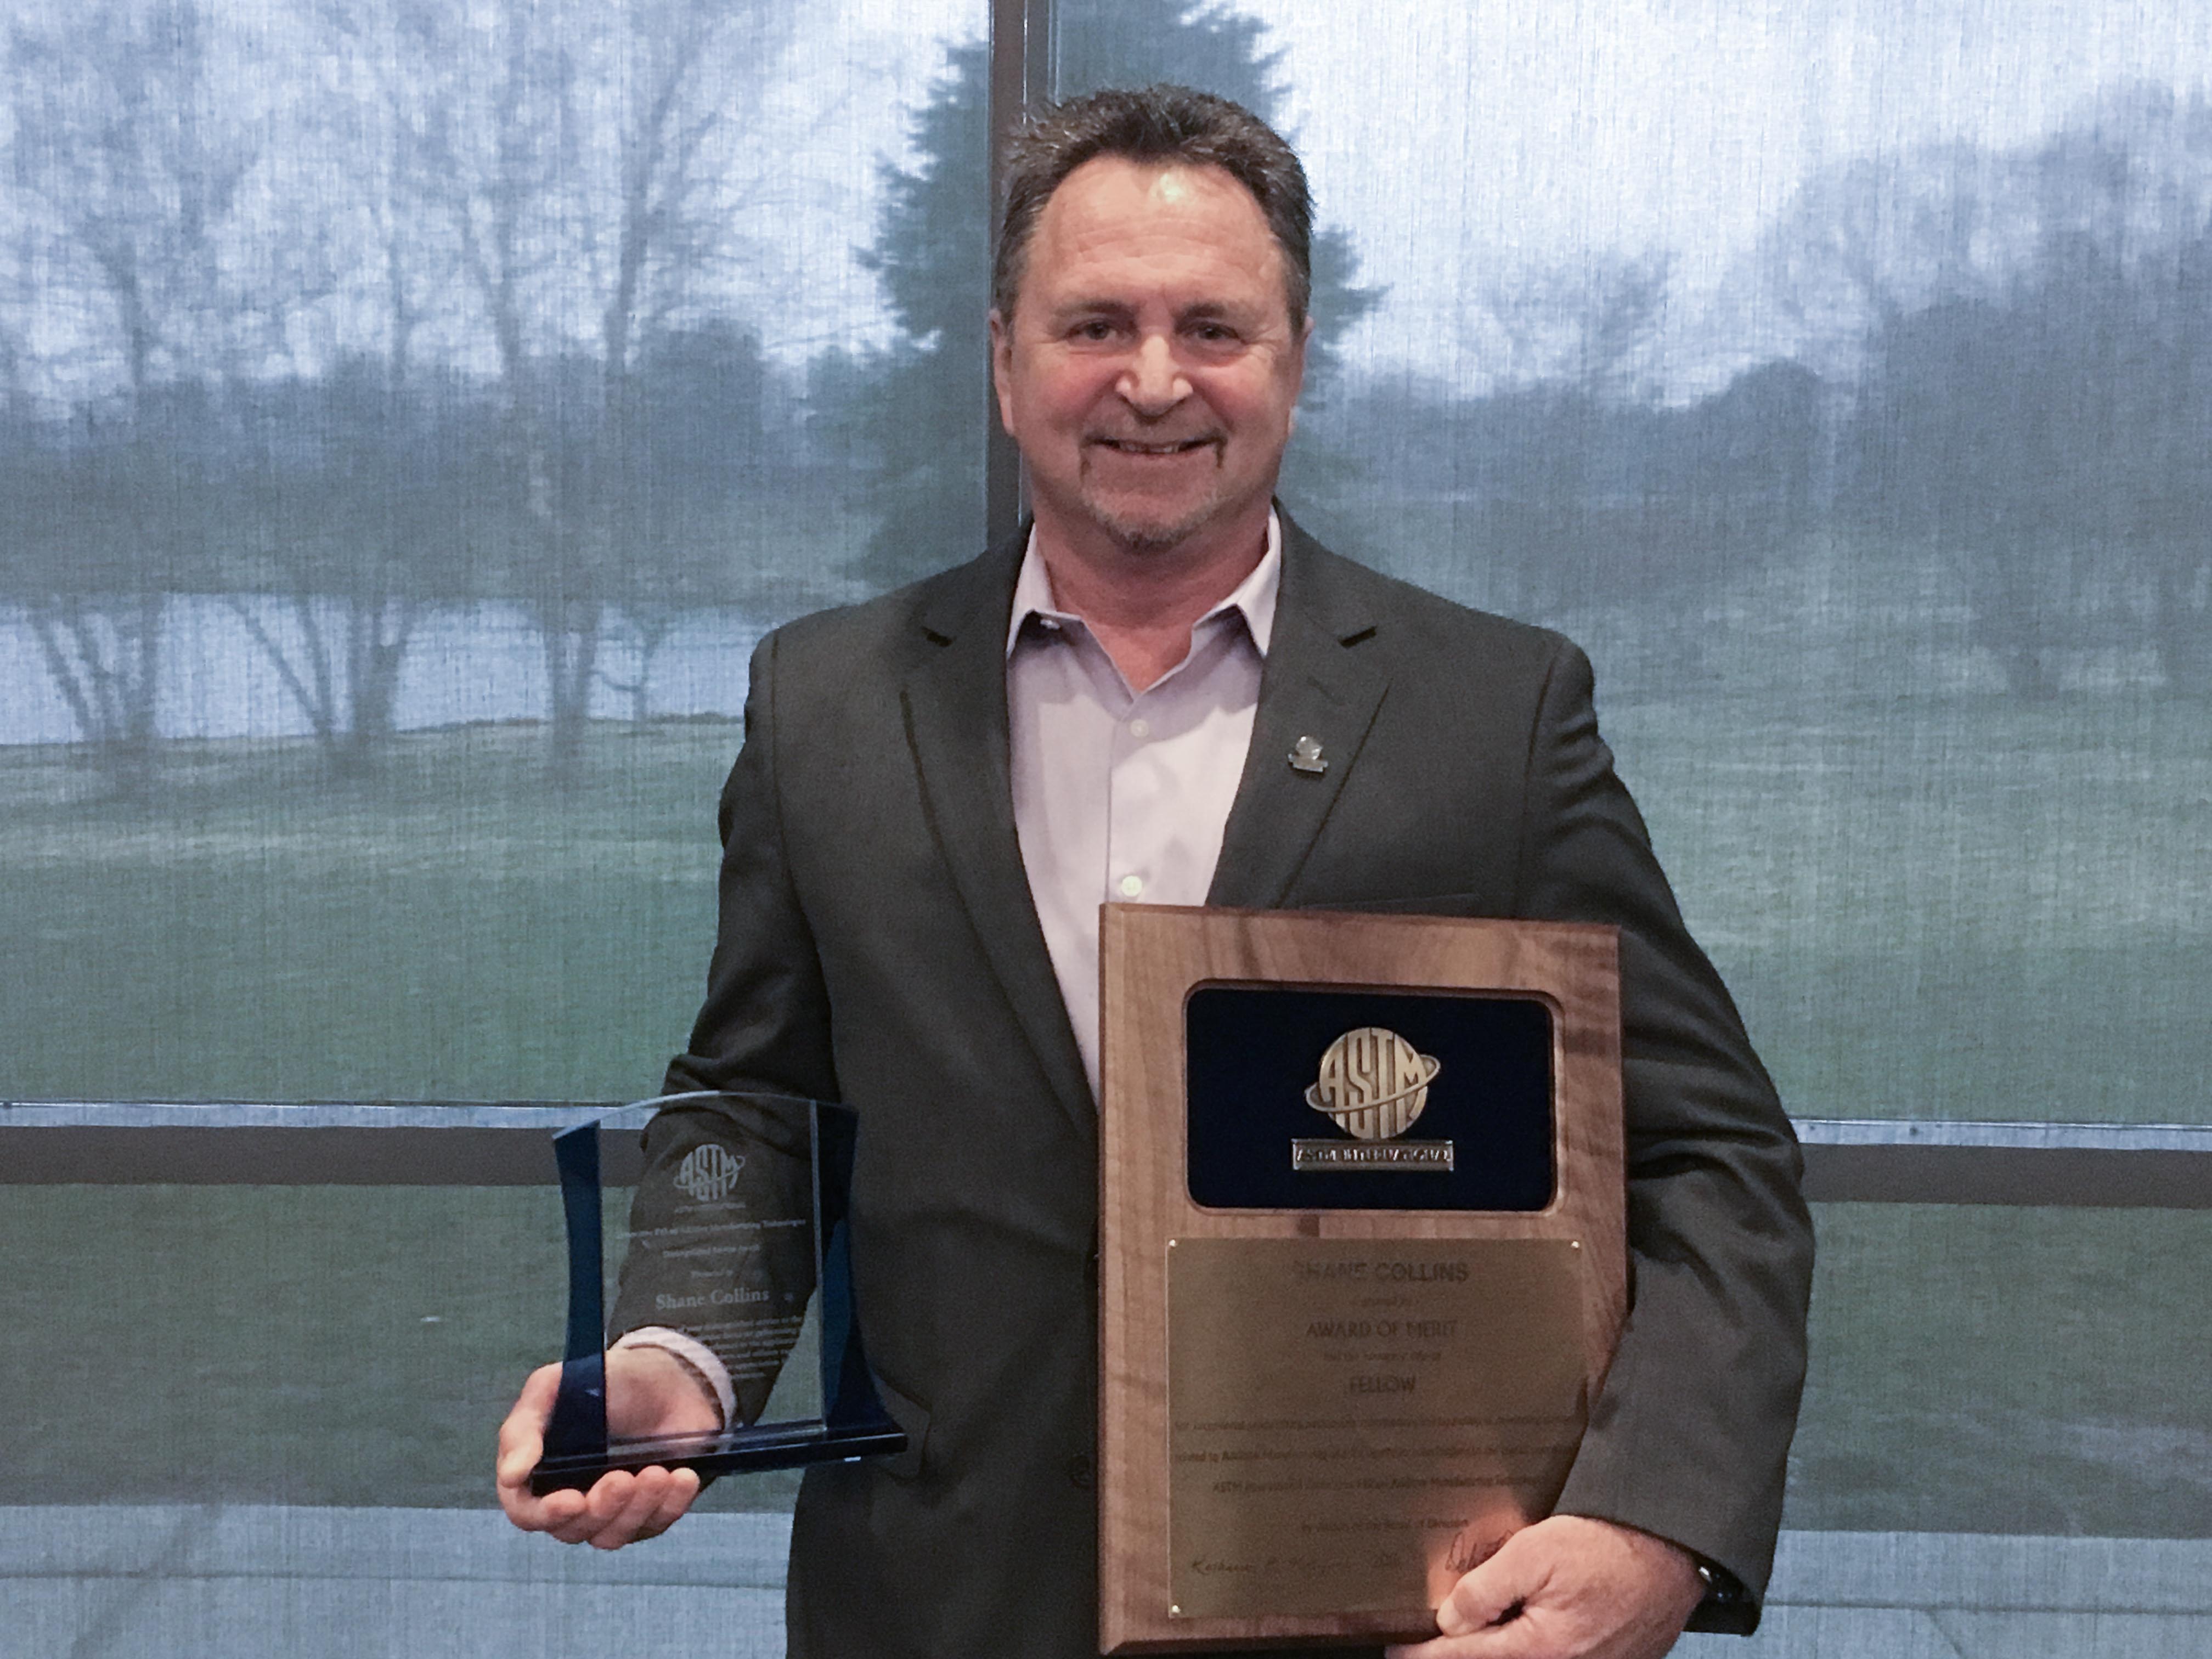 Additive Industries’ Shane Collins has received the ASTM Award of Merit.